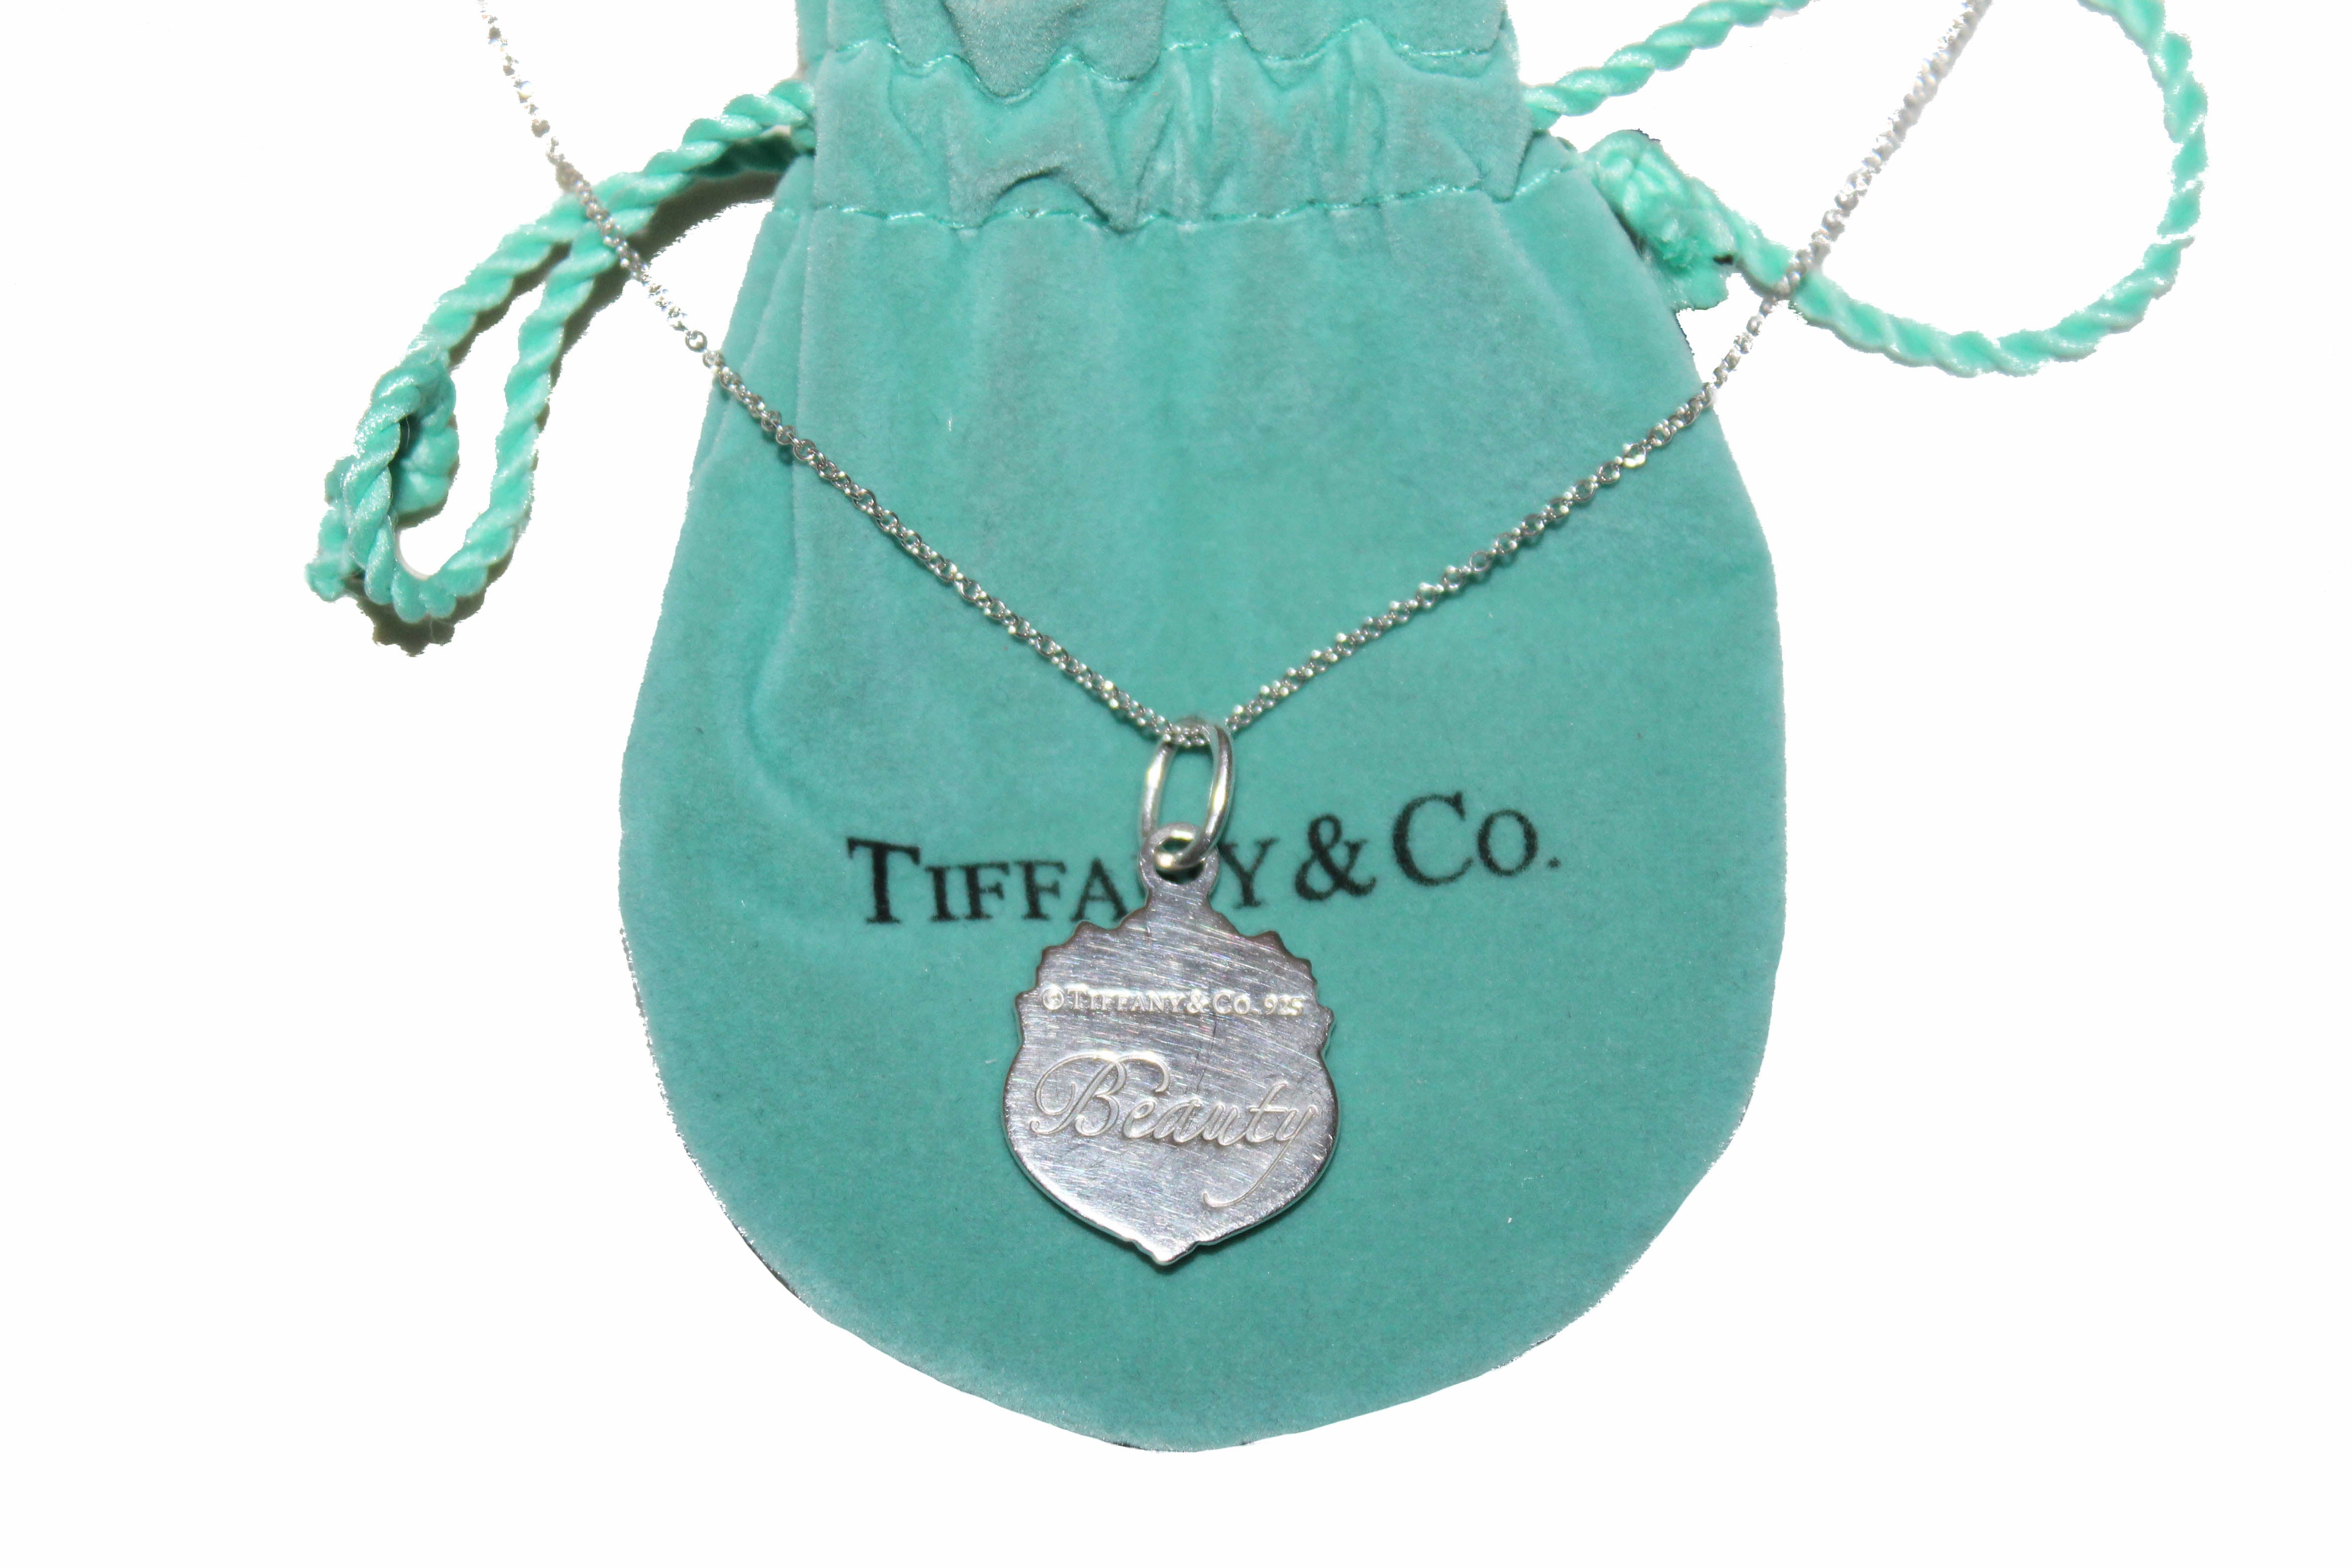 Authentic Tiffany & Co. Sterling Silver Olympian 'Beauty' Charm Necklace